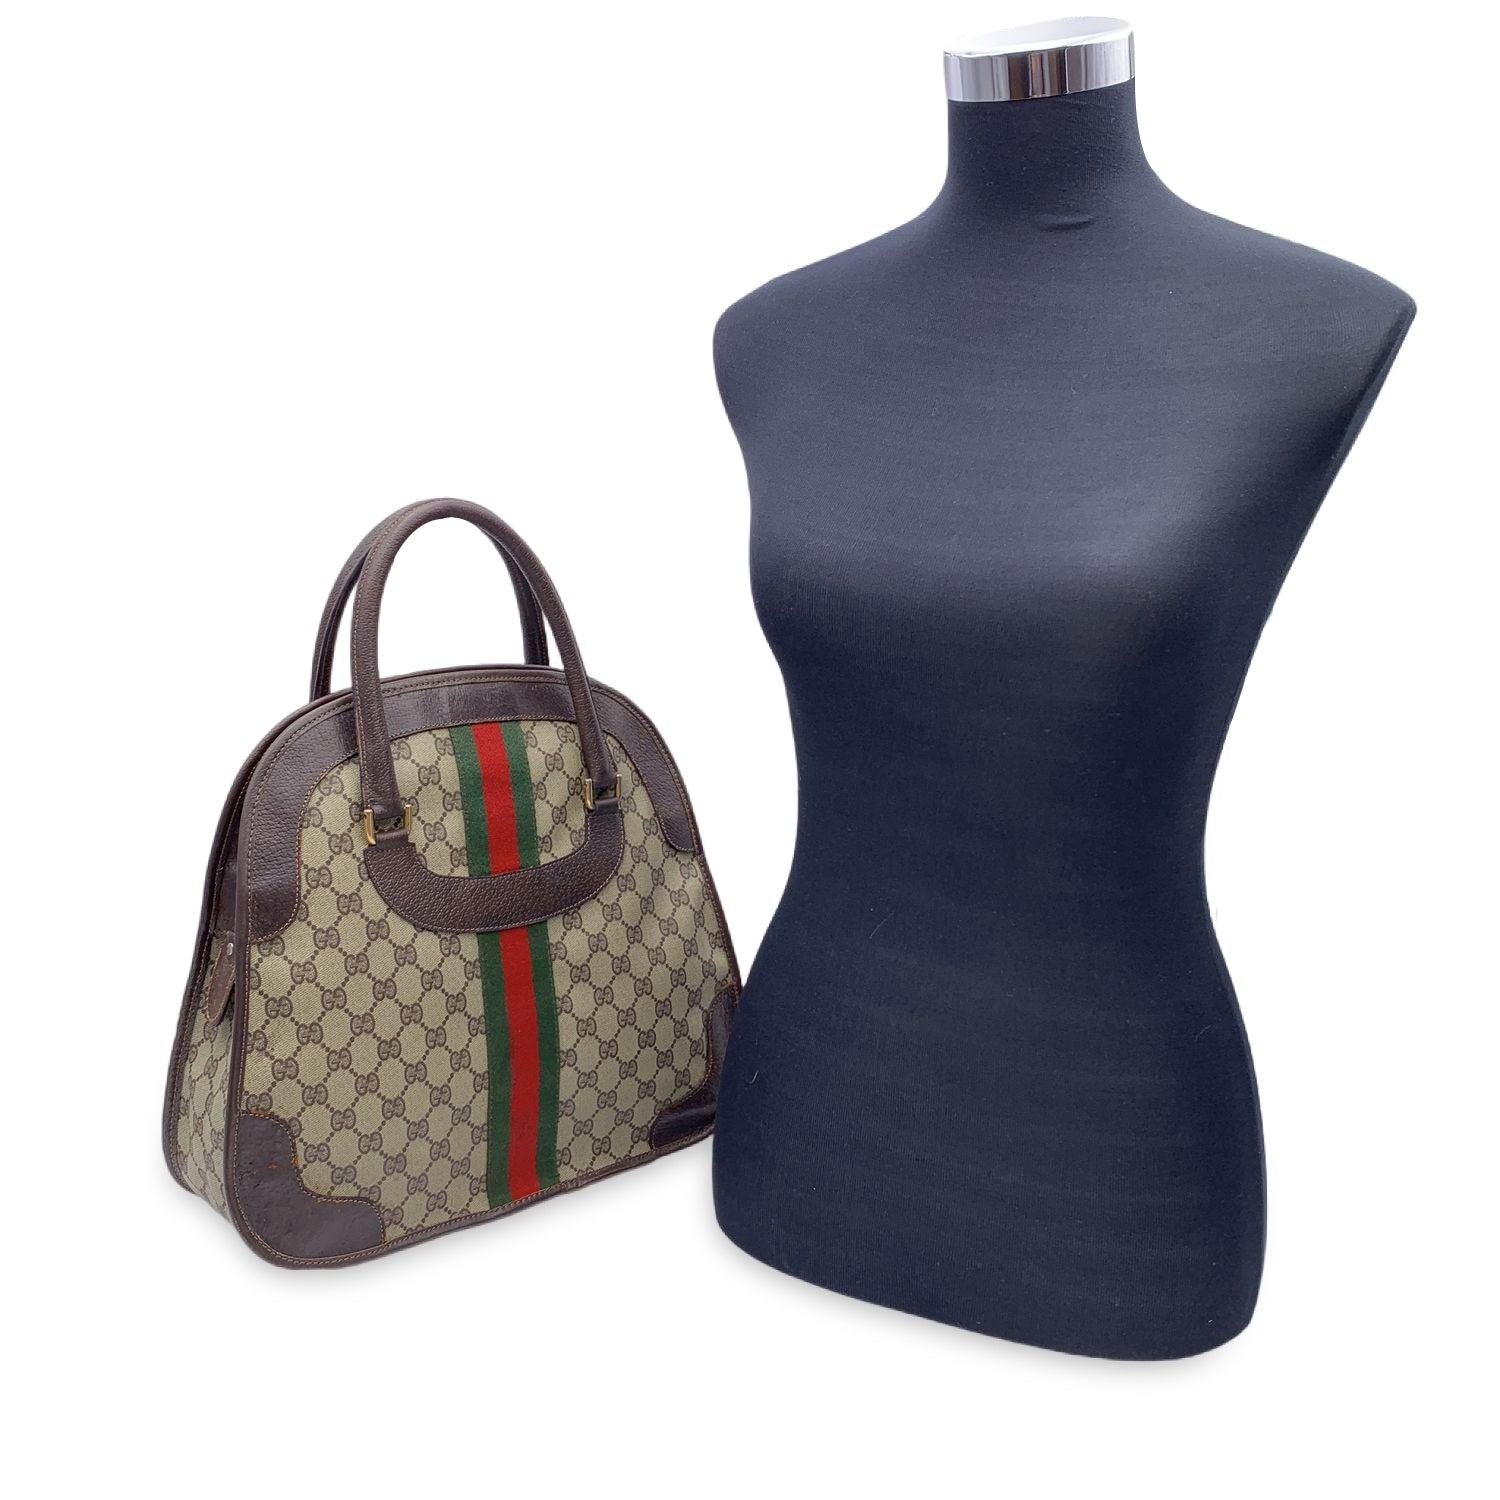 Beautiful Gucci handbag made in beige monogram canvas with brown leather trim and handles. Green/Red/Green stripes on the front and on the back. Upper zipper closure. Beige lining. 1 side zip pocket inside. 'Made in Italy by Gucci - Brevettato' tag